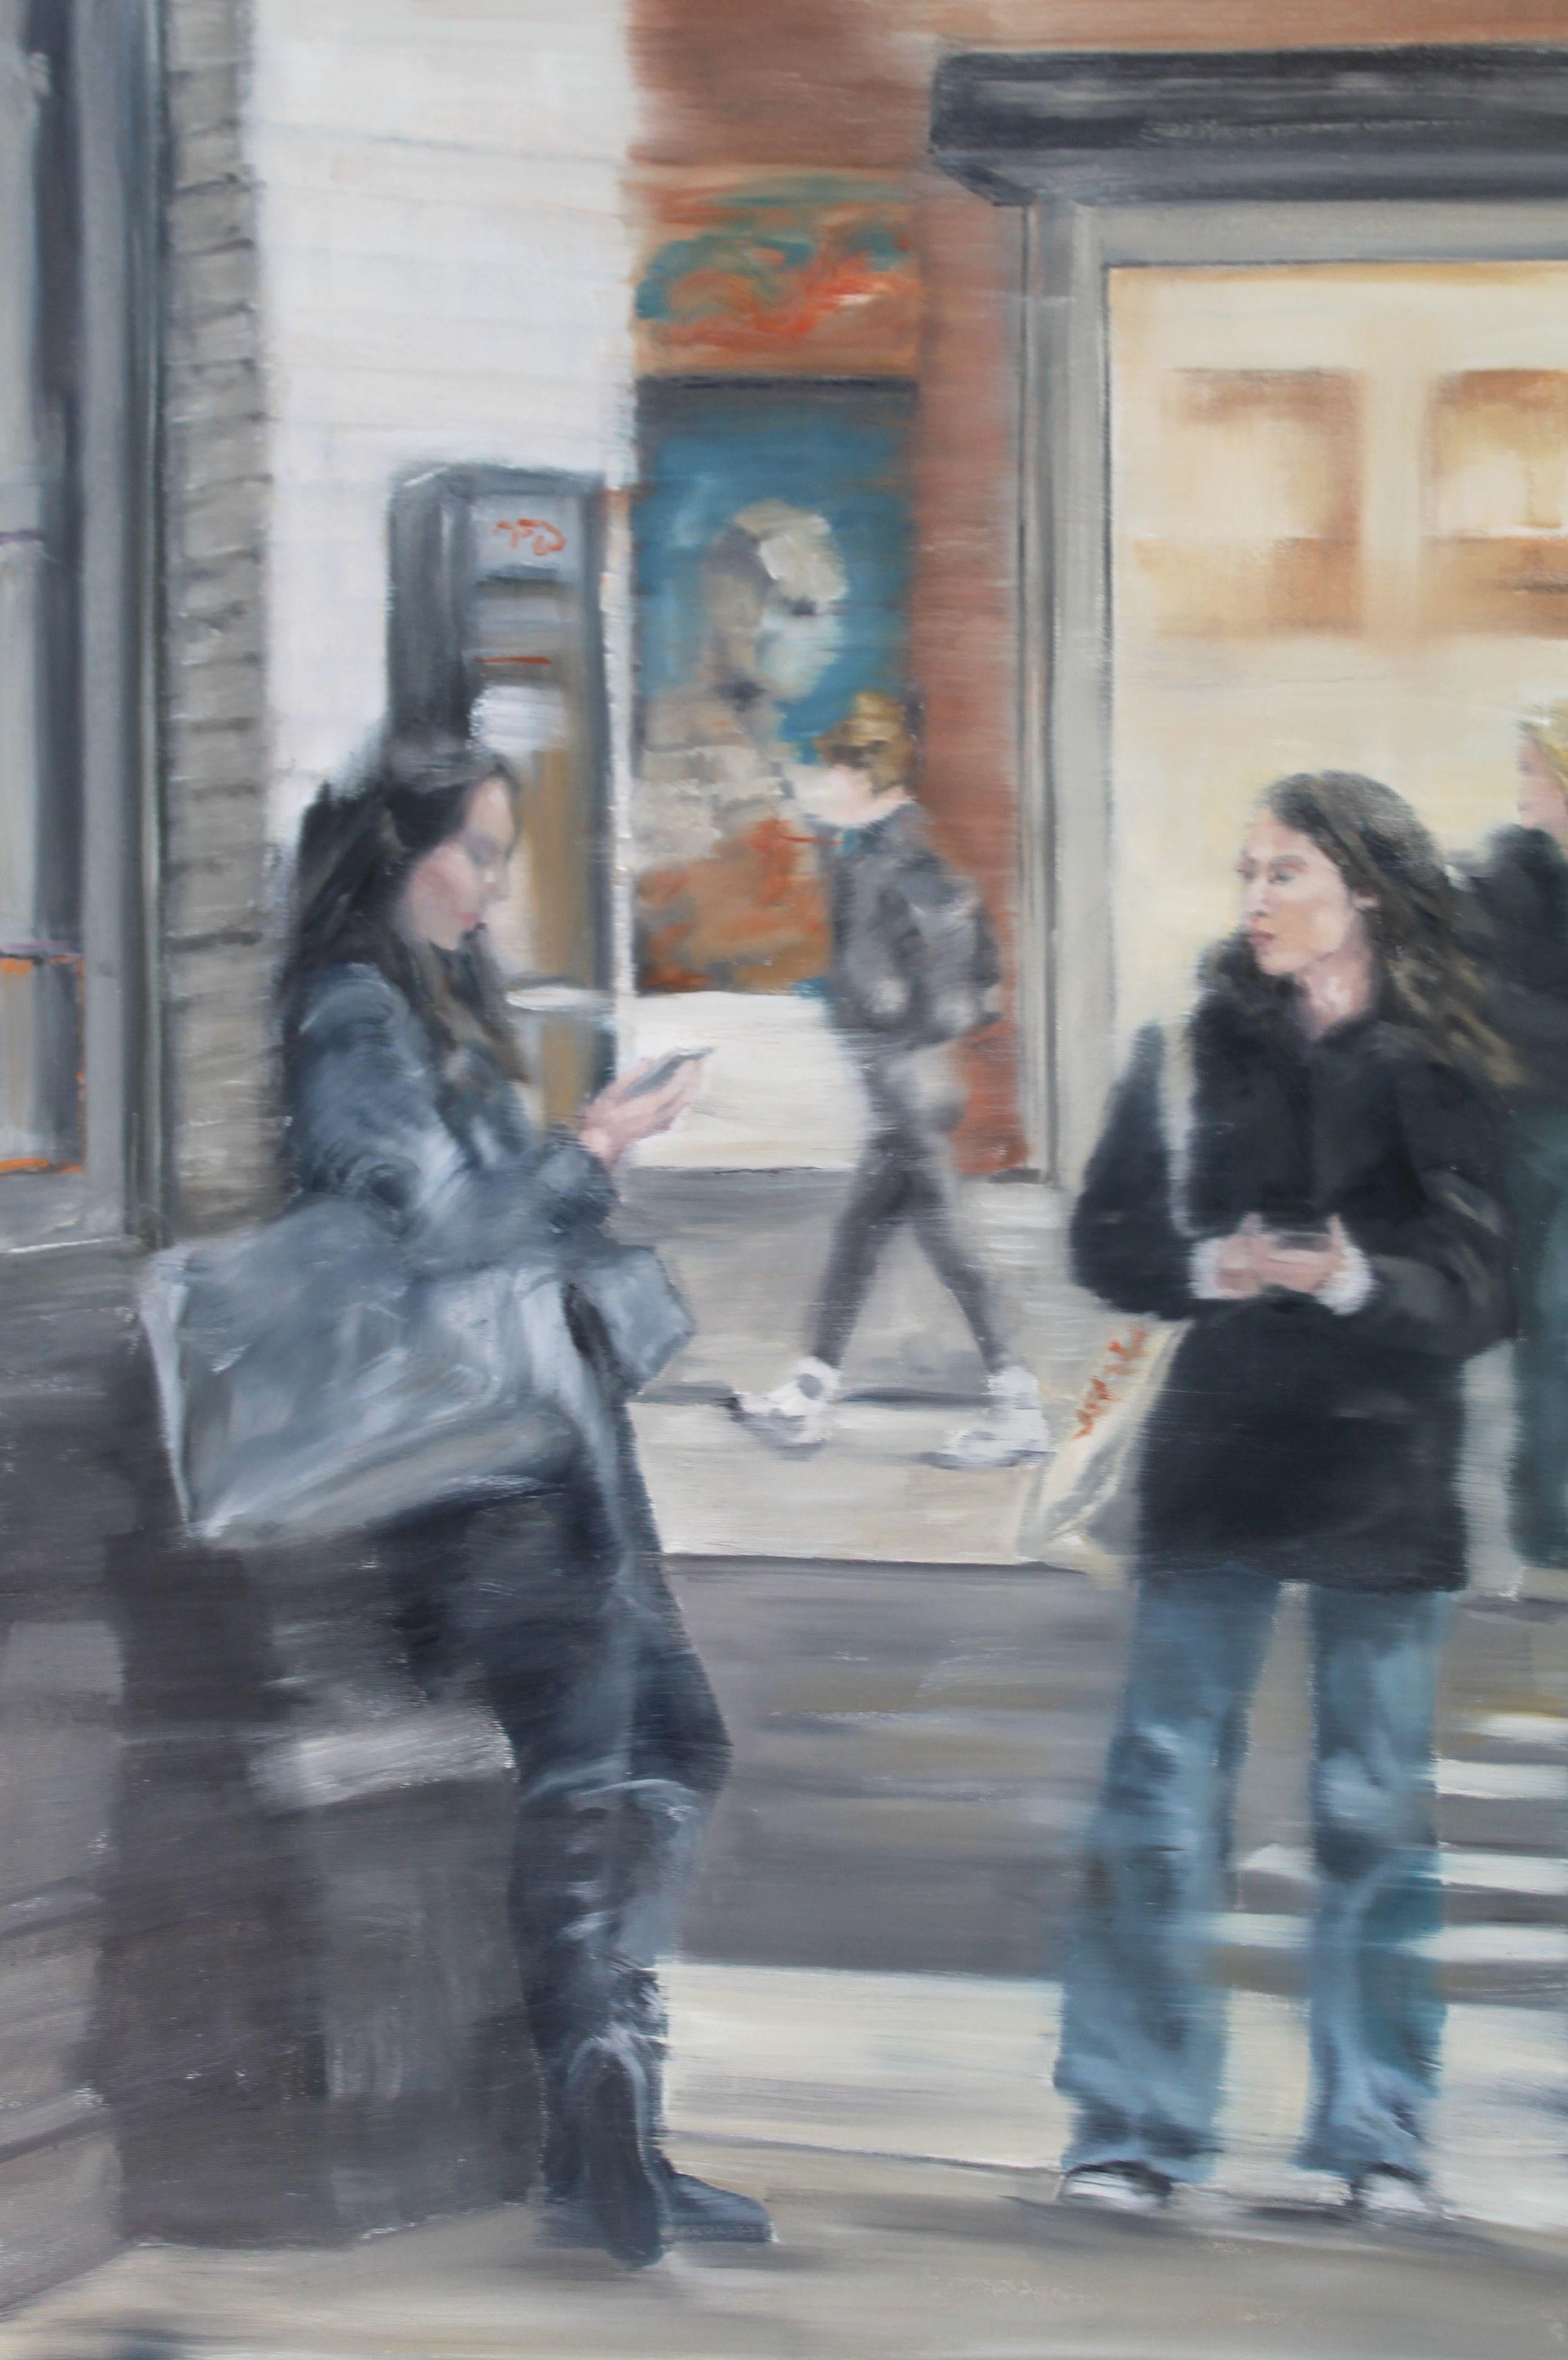 There is a comfort being with friends, whether talking or just standing together. These two paused on the street for a moment while the city continued to move on. The painting is soft and blurred to add to the brevity of the moment. :: Painting ::